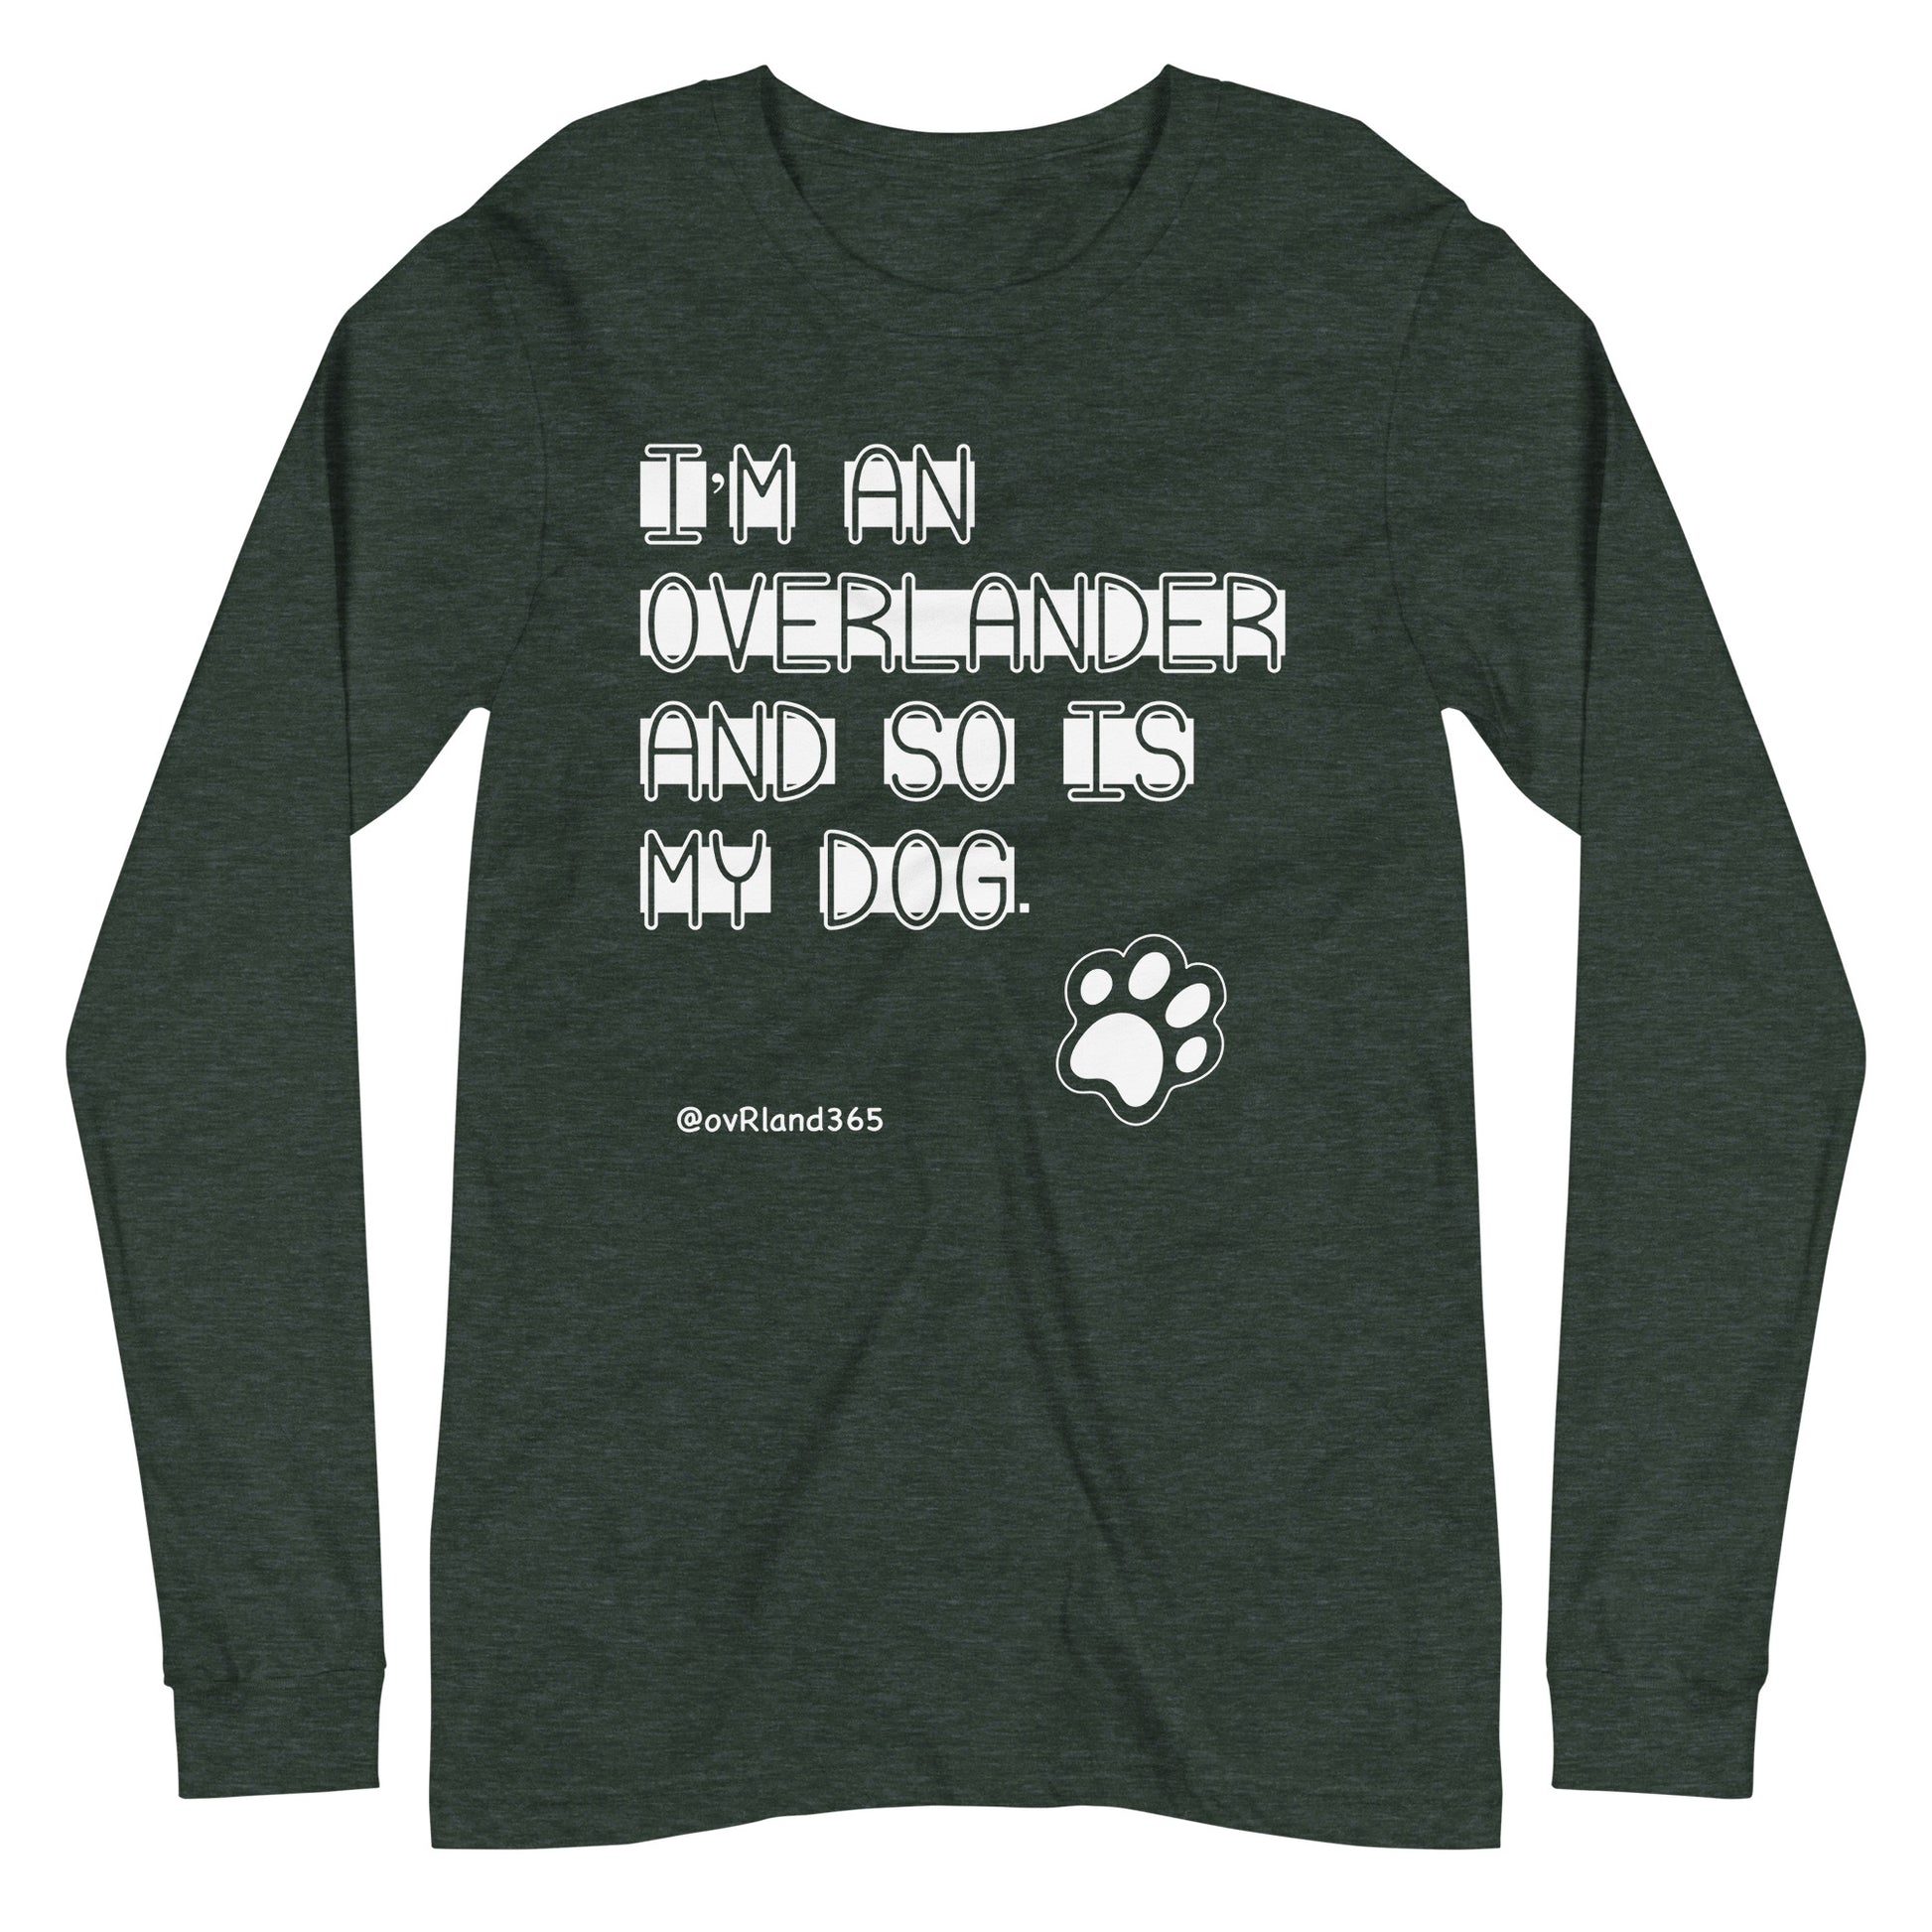 I'm an overlander and so is my dog. Forest long-sleeve with a paw print. overland365.com